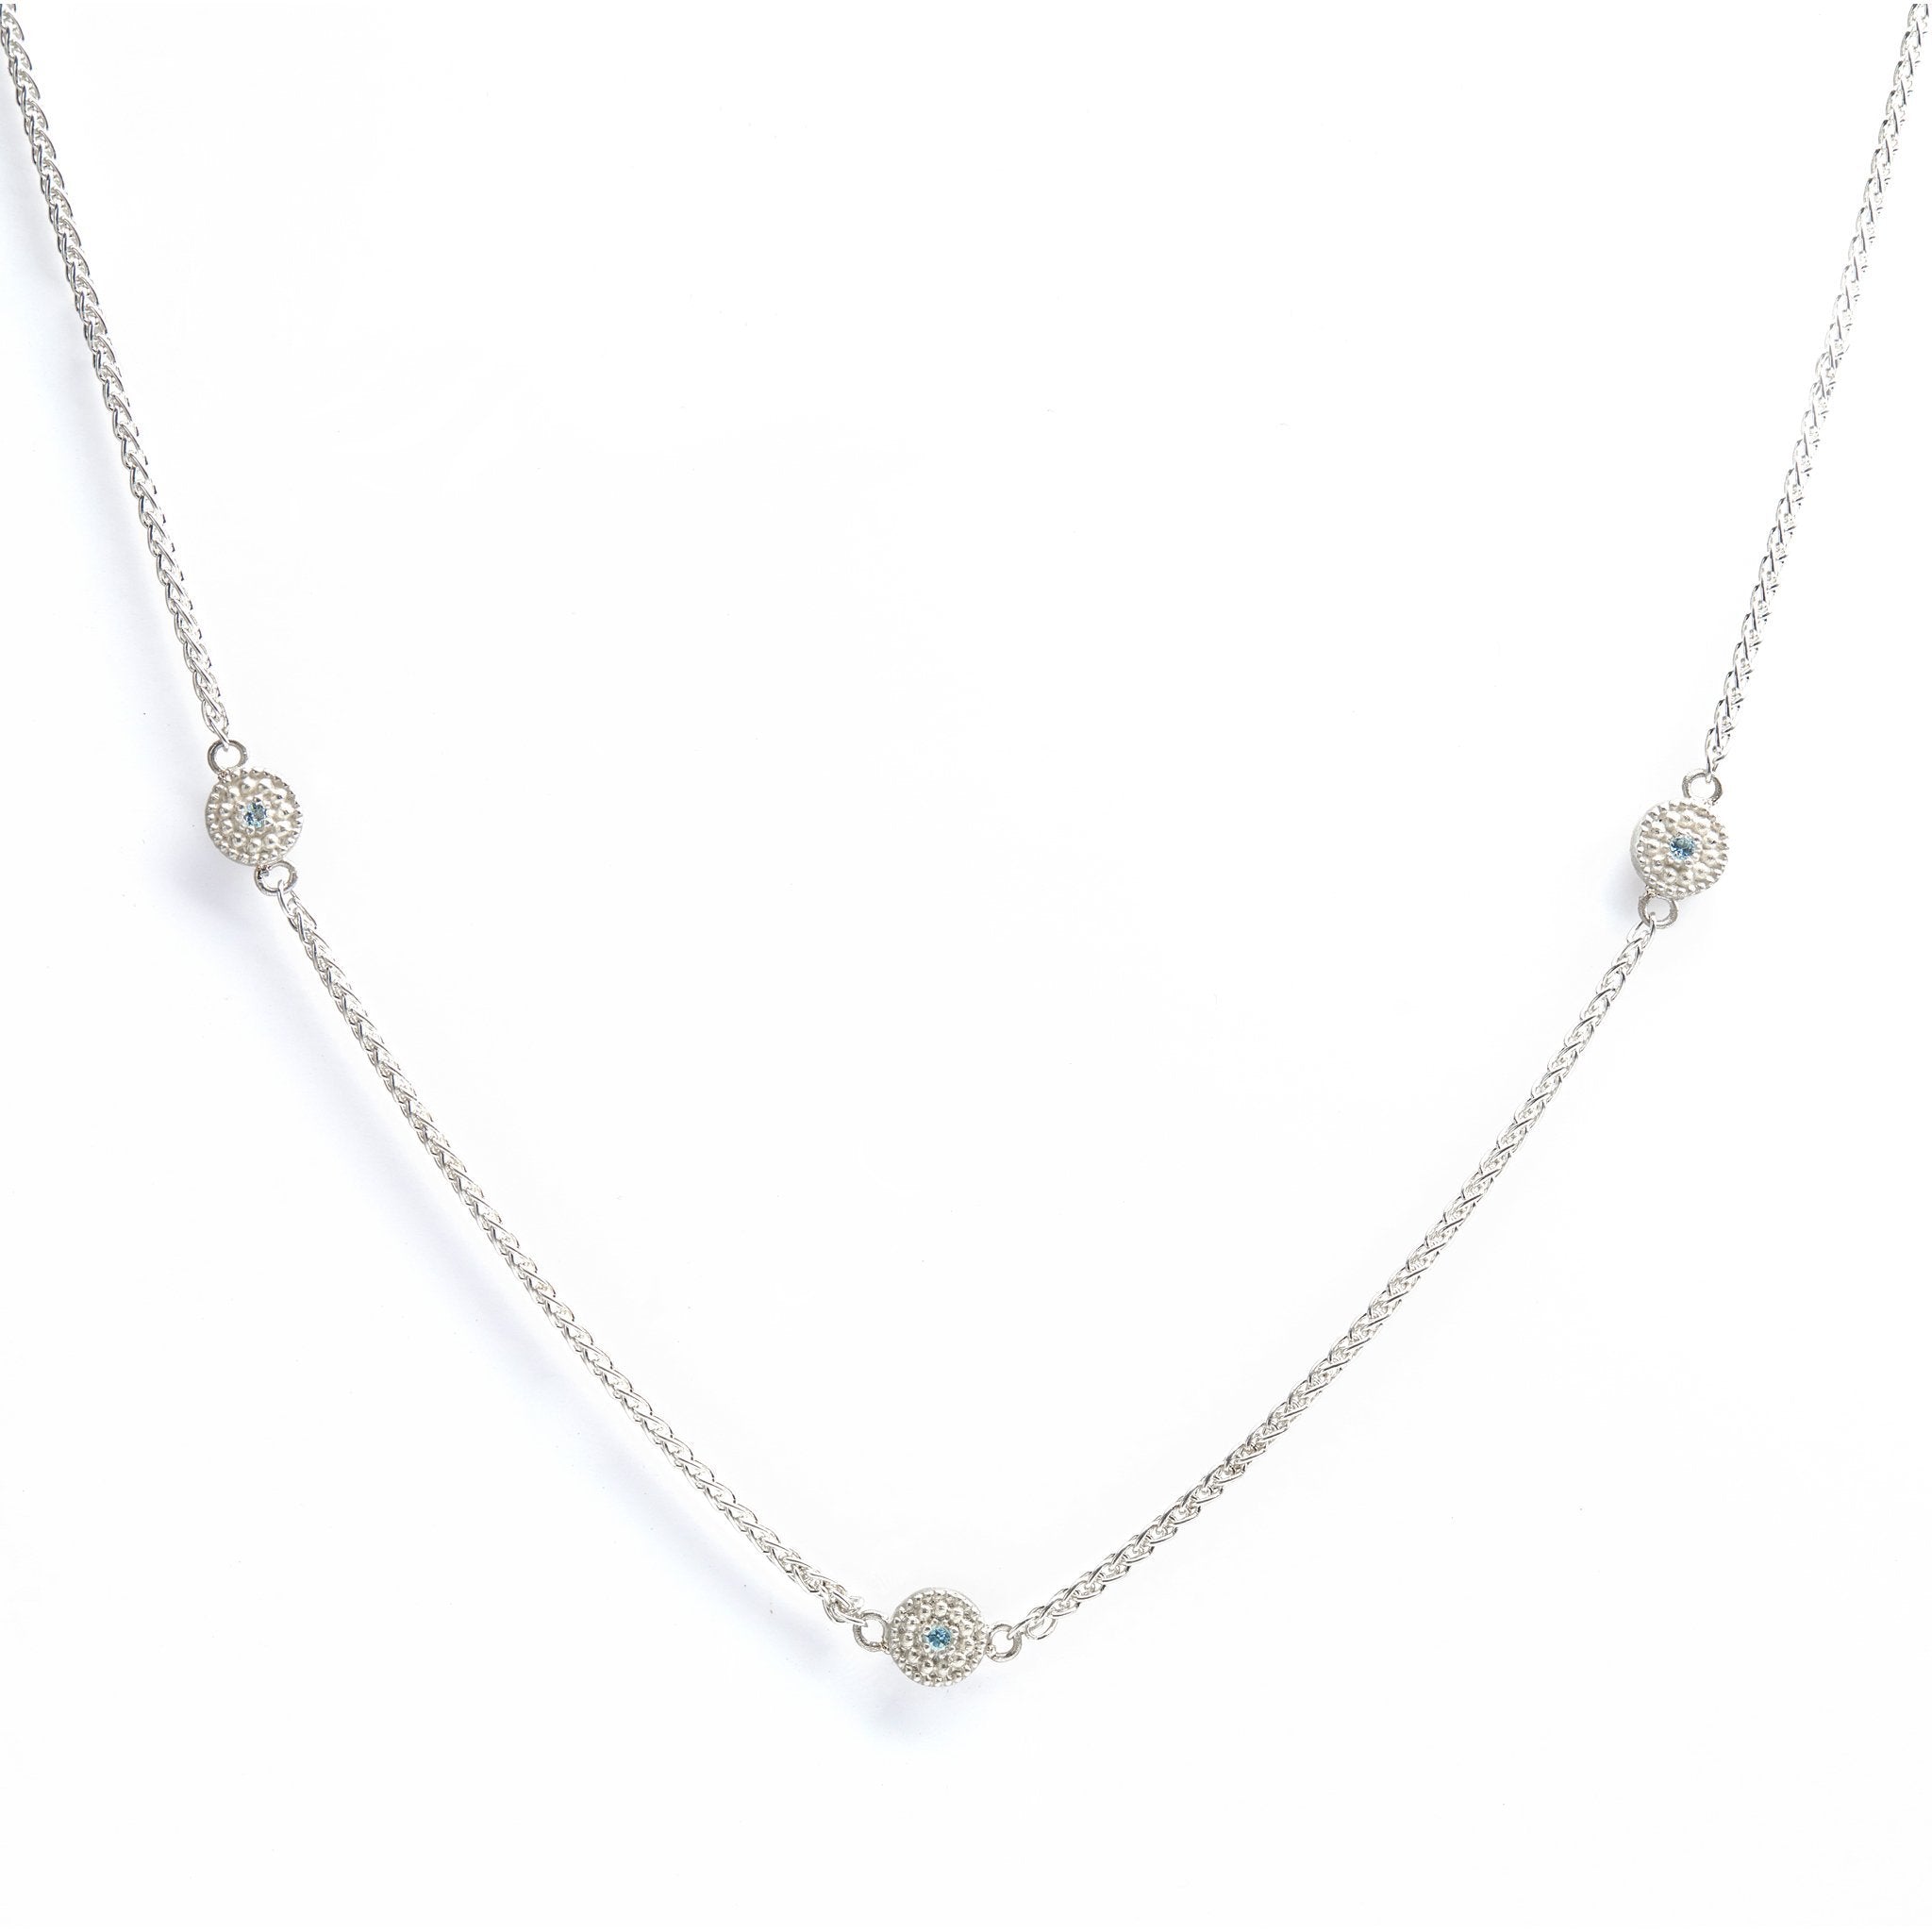 The Reverso Trio Necklace with Crystal Quartz and Aquamarines - Christelle Chamberland